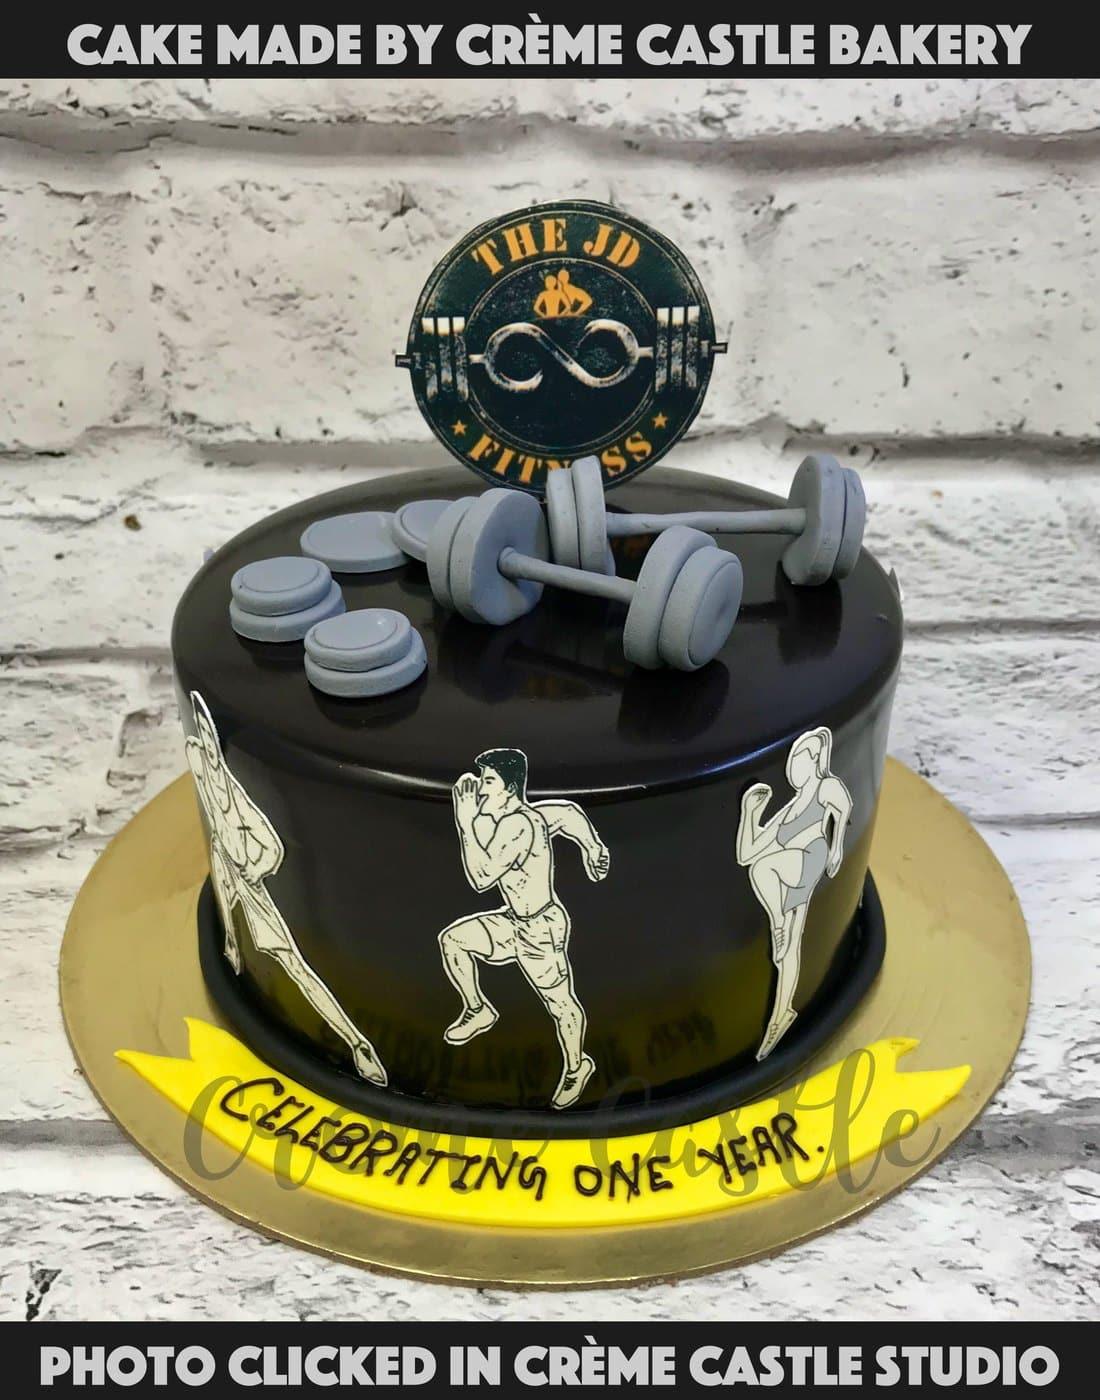 Gym Cake | Father's Day Cake | Birthday Cake In Dubai | Cake Delivery –  Mister Baker